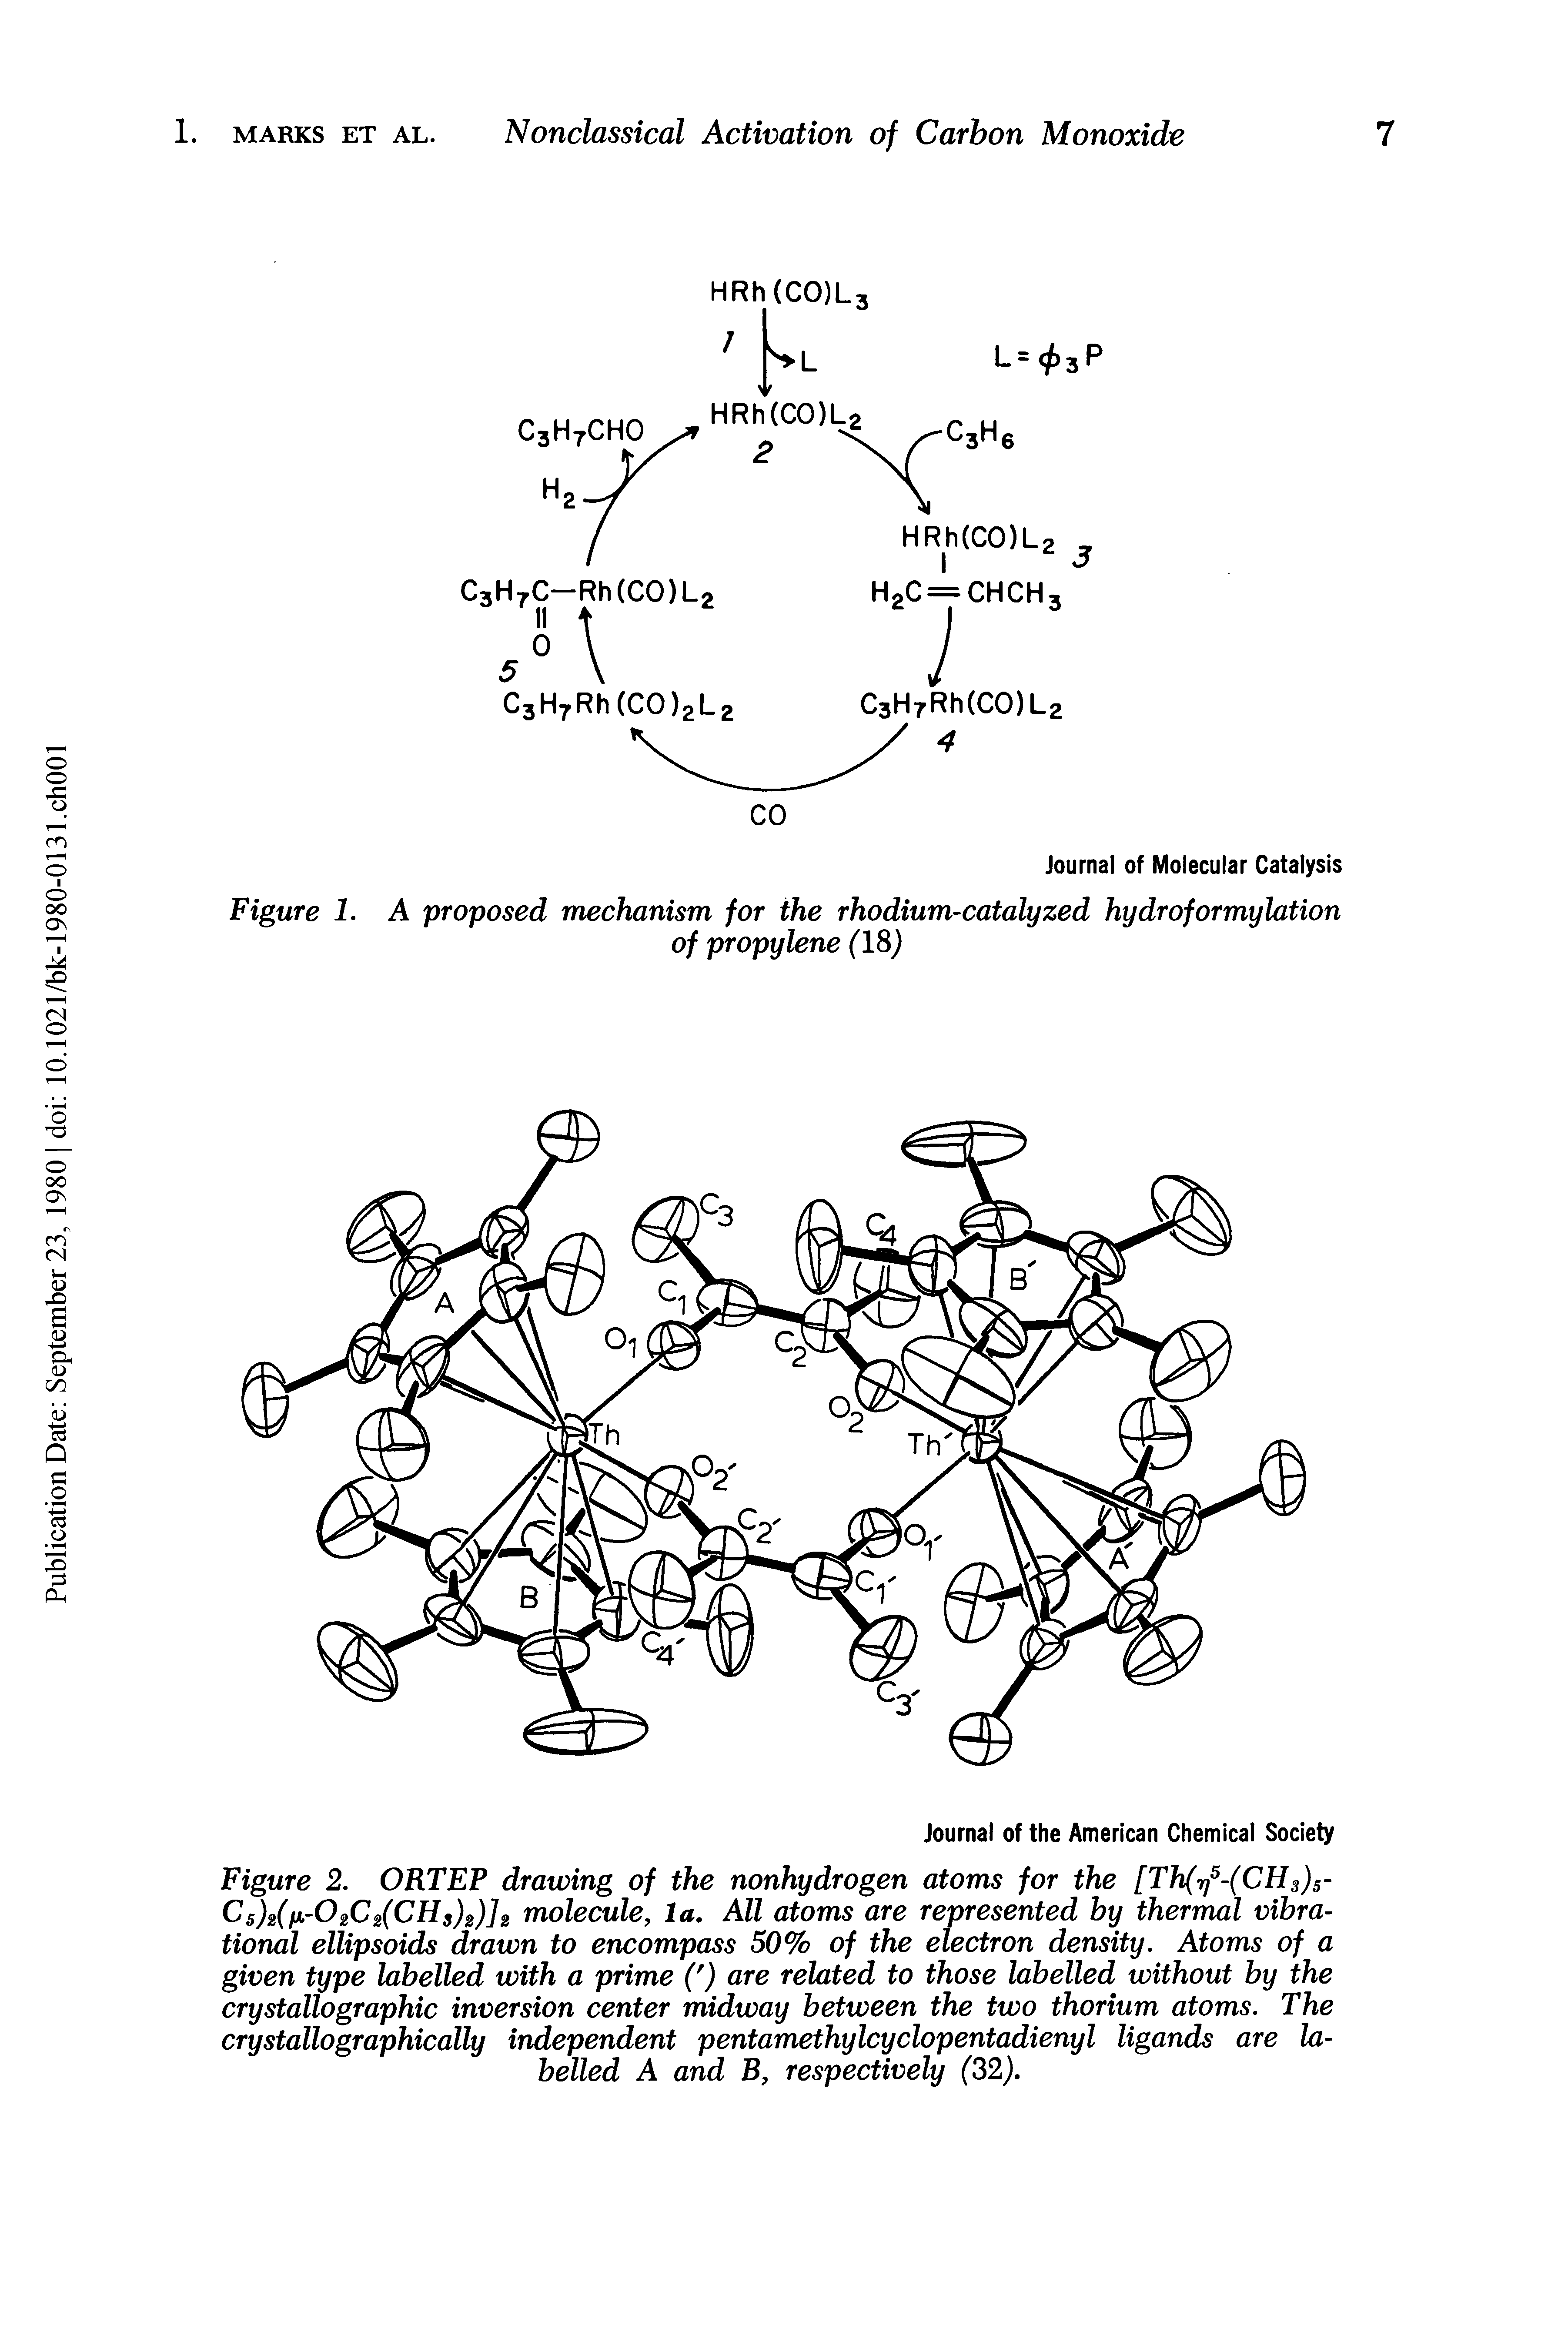 Figure 2. ORTEP drawing of the nonhydrogen atoms for the [Th(r)5-(CH3)5-C5)2( -02C2(CHS)2)]2 molecule, la. All atoms are represented by thermal vibrational ellipsoids drawn to encompass 50% of the electron density. Atoms of a given type labelled with a prime ( ) are related to those labelled without by the crystallographic inversion center midway between the two thorium atoms. The crystallographically independent pentamethylcyclopentadienyl ligands are labelled A and B, respectively (32).